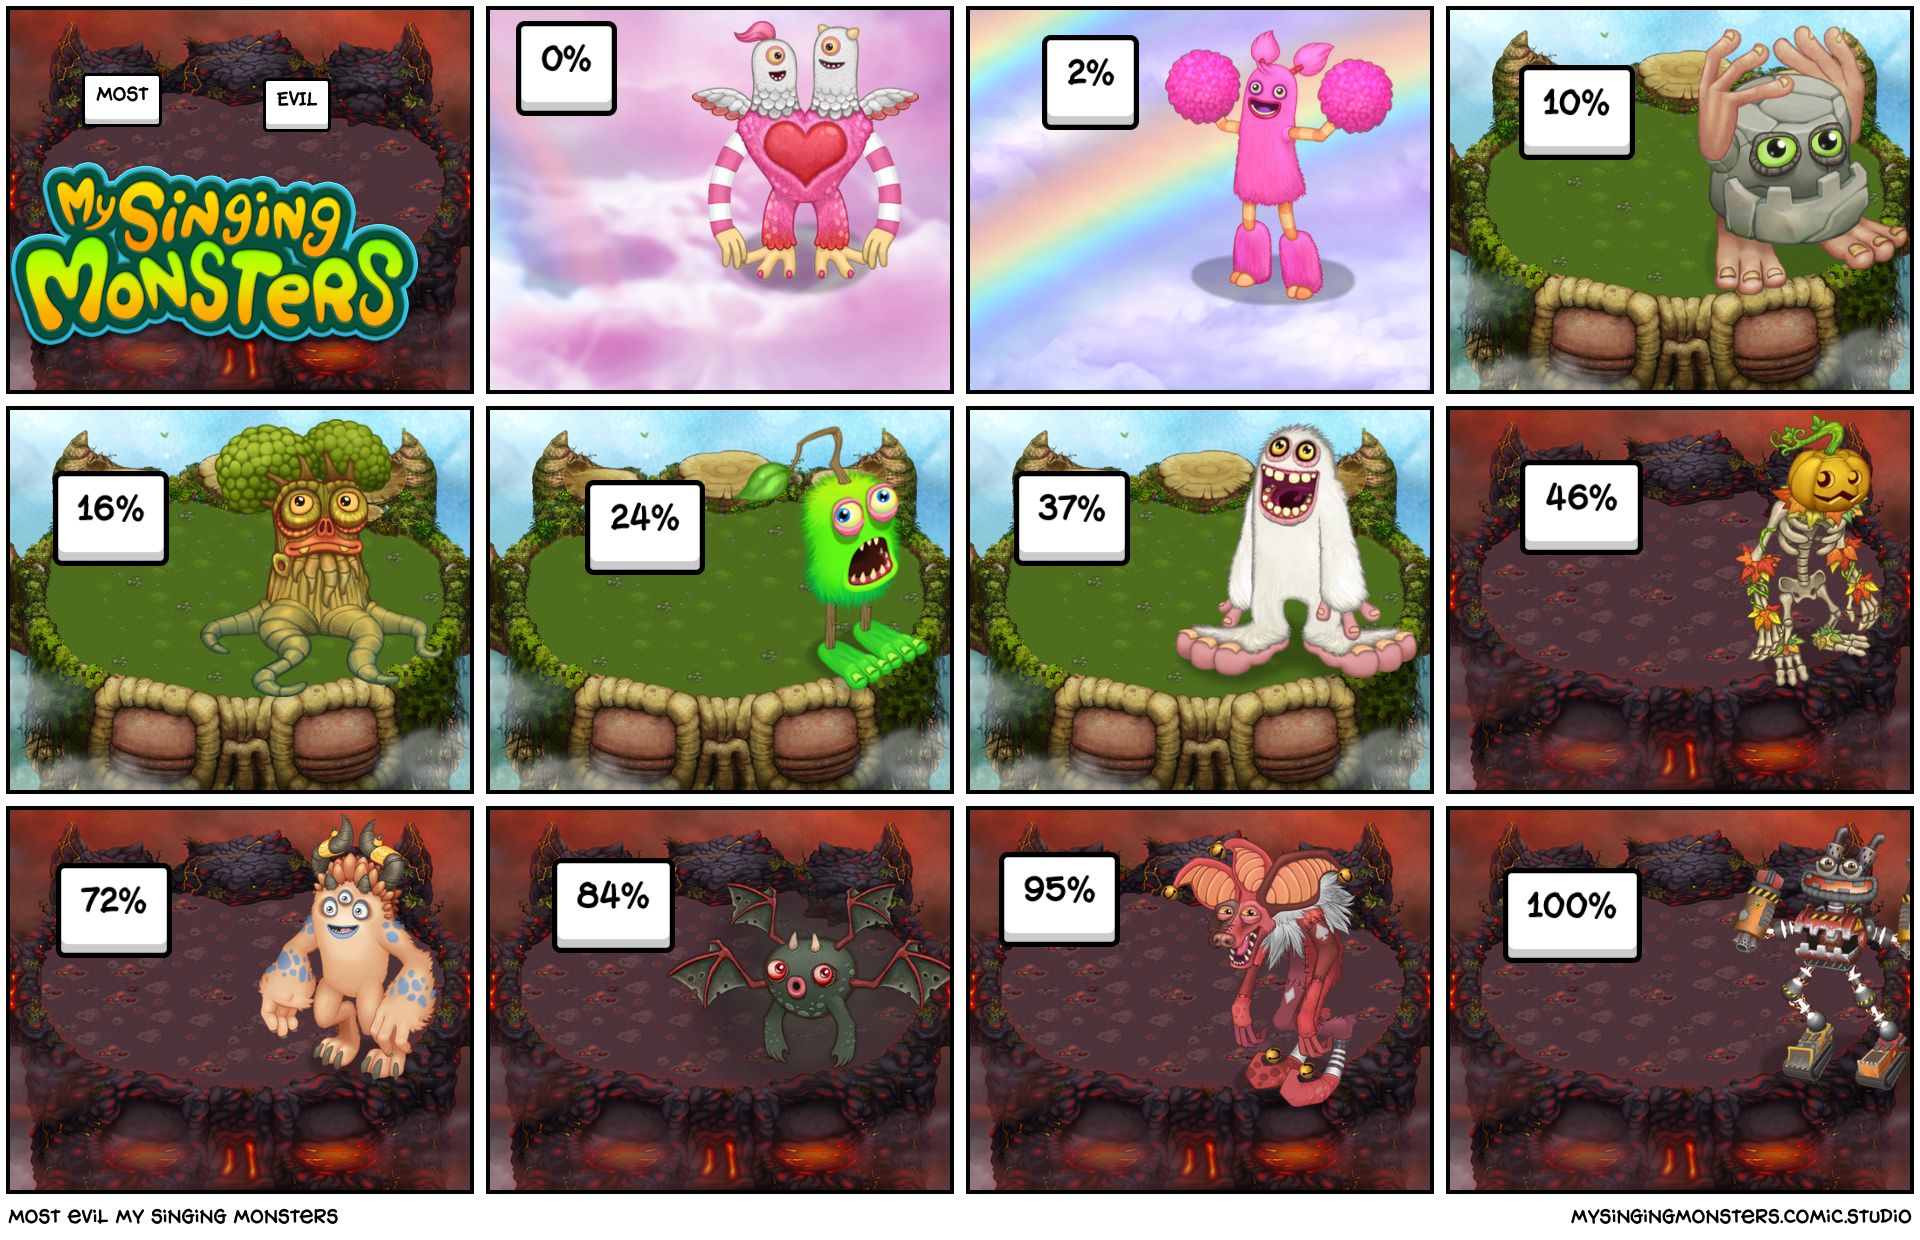 Most evil my singing monsters